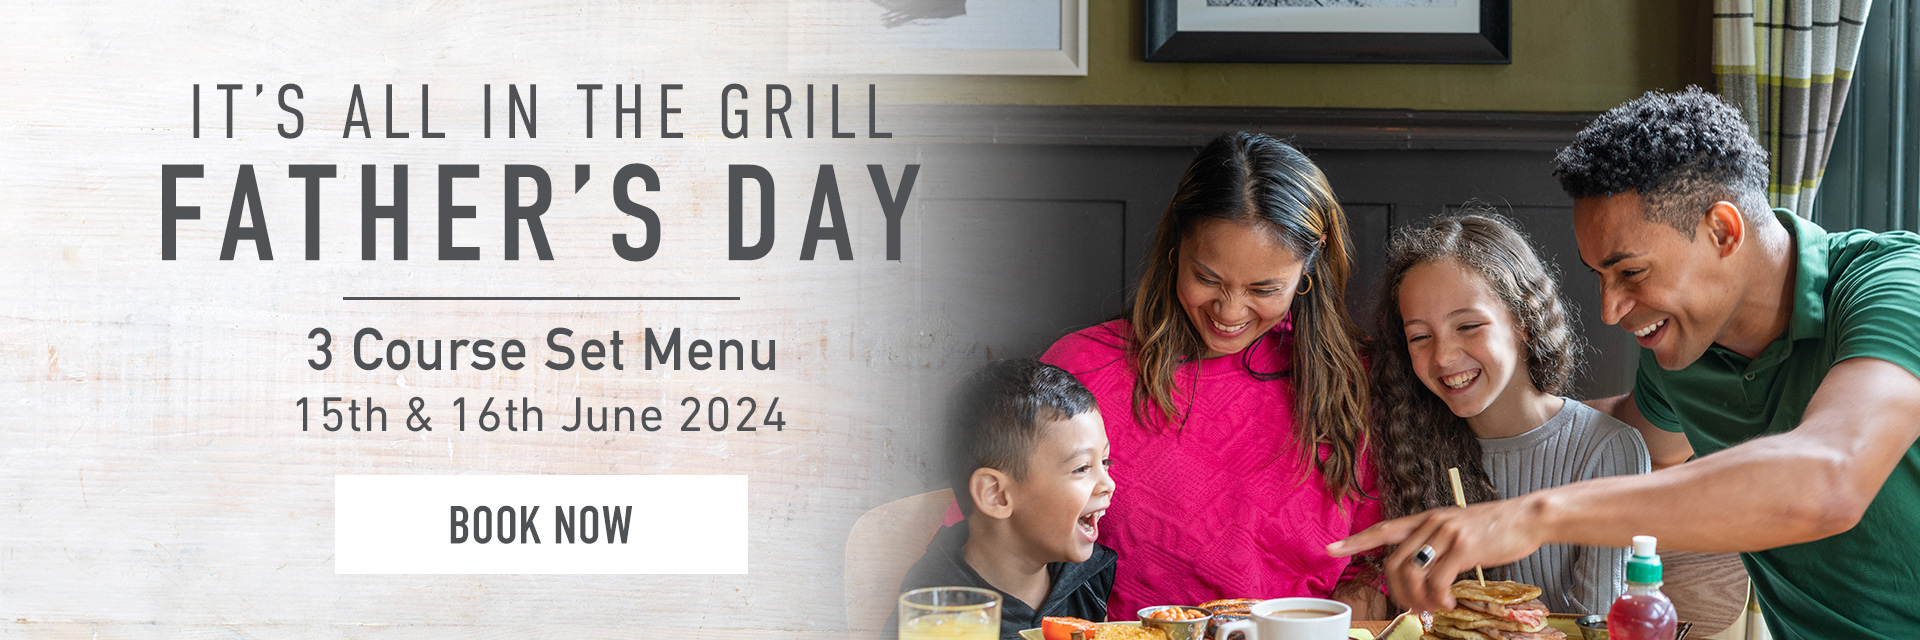 Father’s Day at Harvester Pontypool